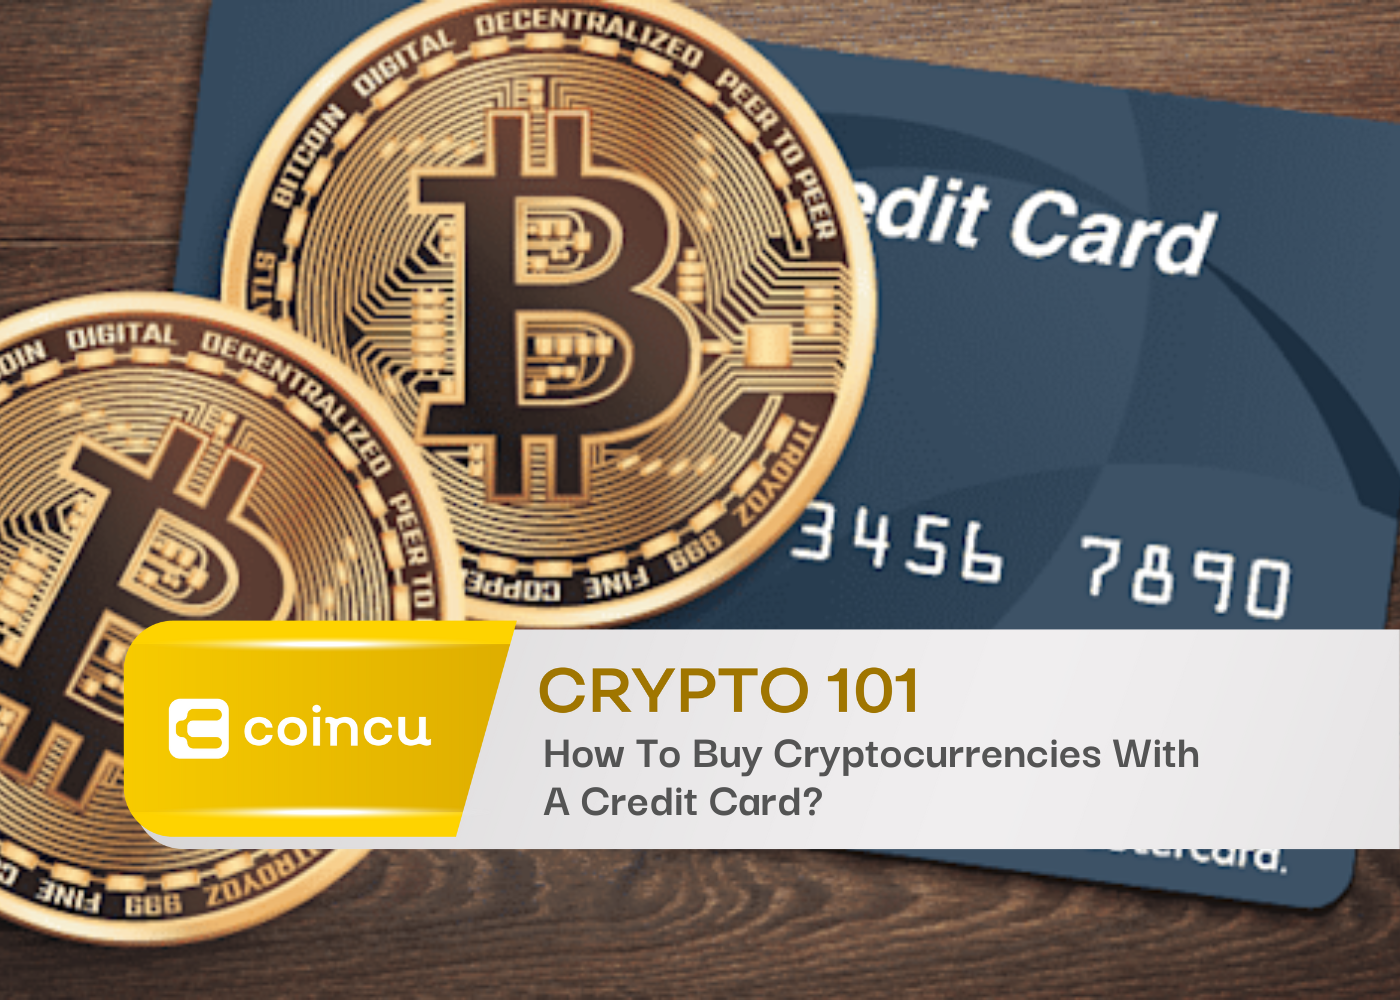 Crypto 101: How To Buy Cryptocurrencies With A Credit Card?